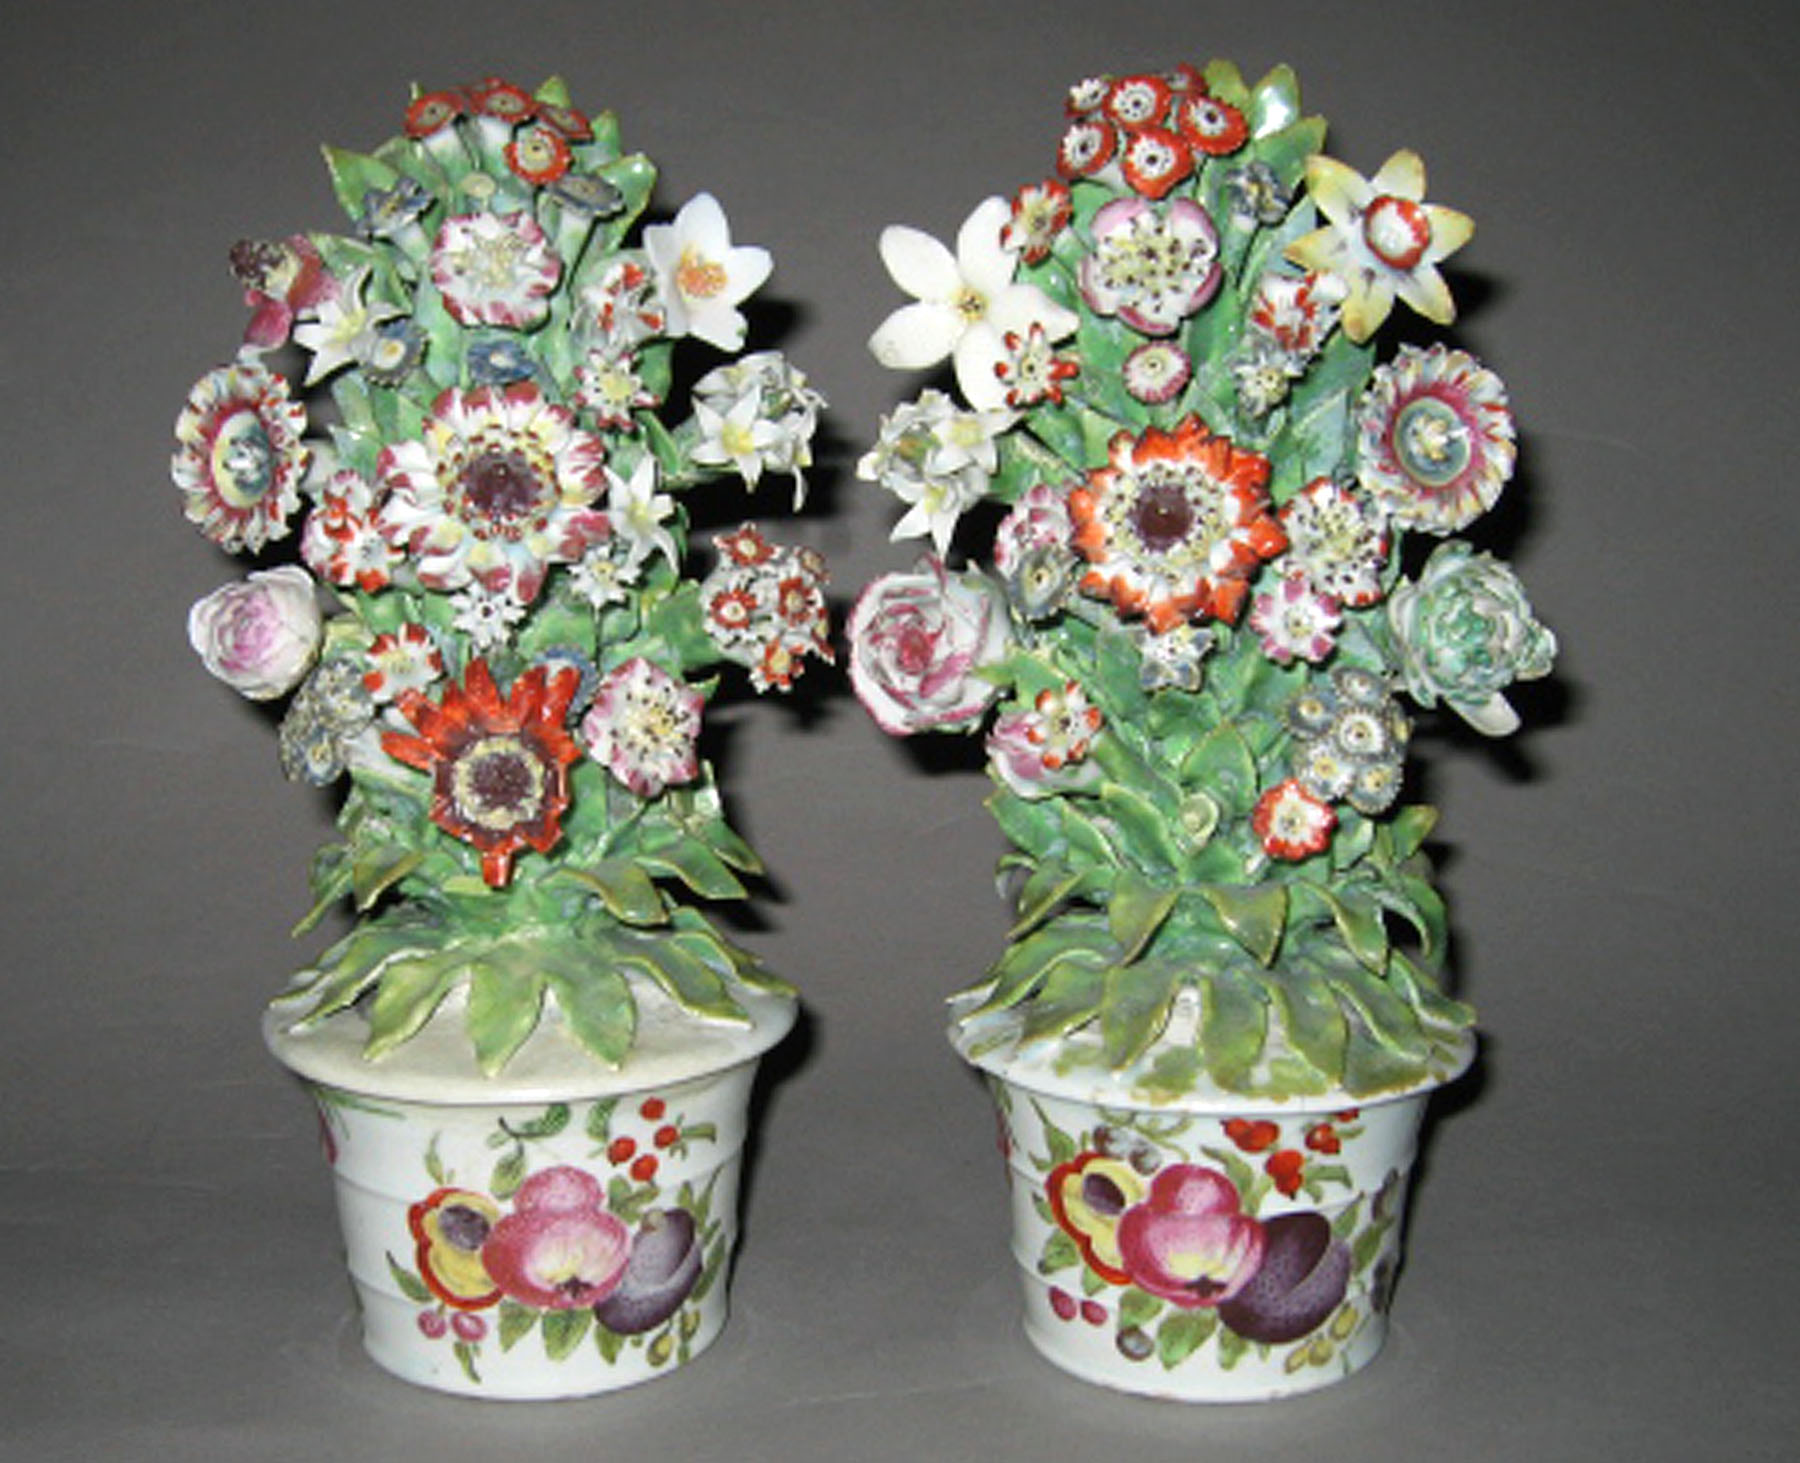 2003.0013.085.001, .002 Porcelain pots with modeled flowers